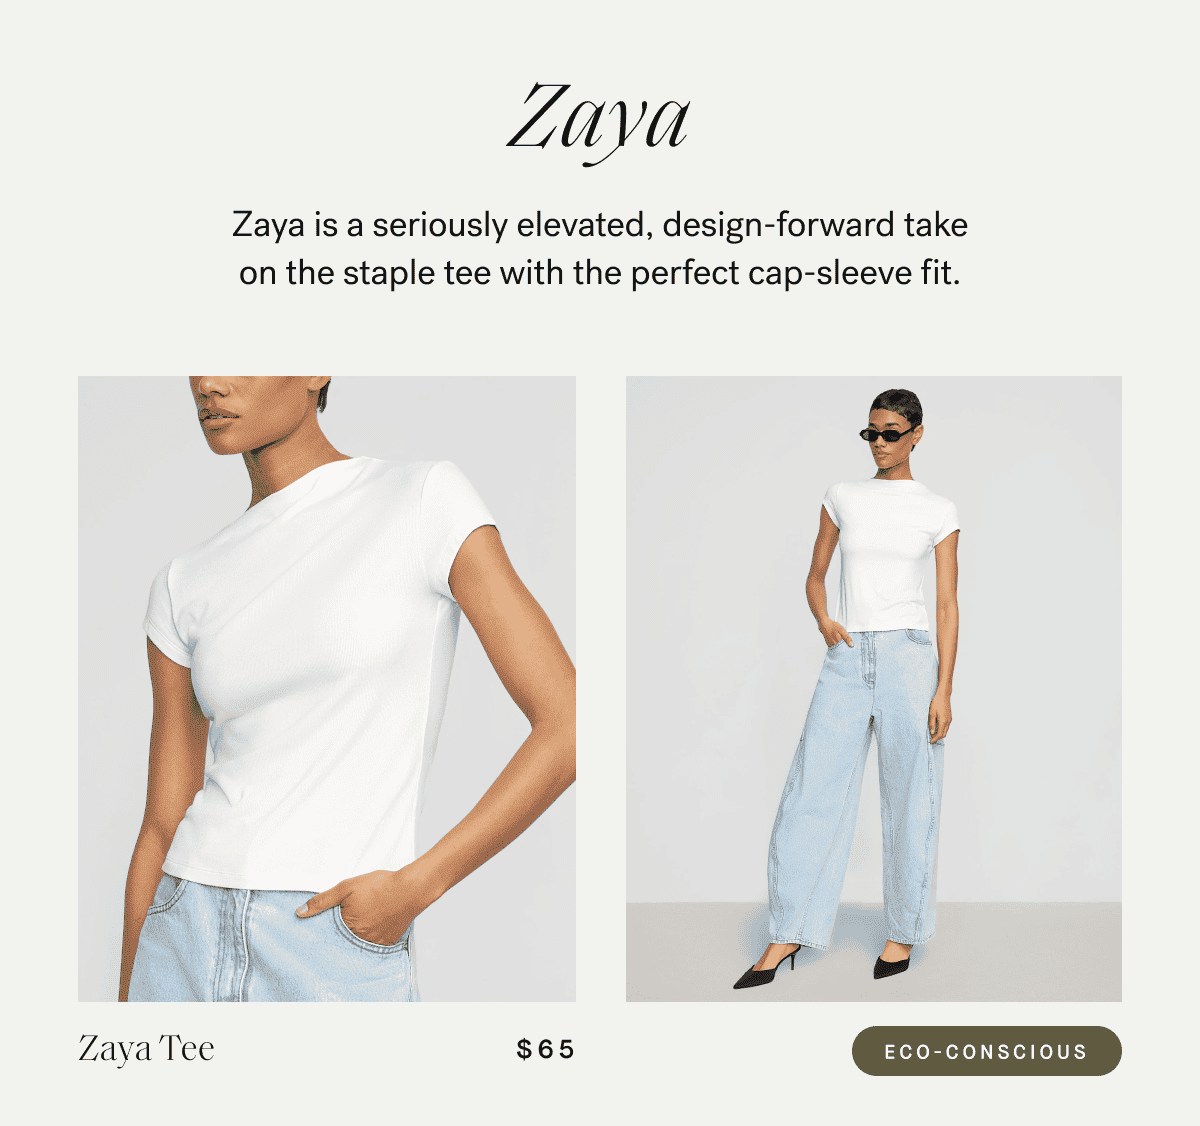 Zaya — Zaya is a seriously elevated, design-forward take on the staple tee with the perfect cap-sleeve fit.